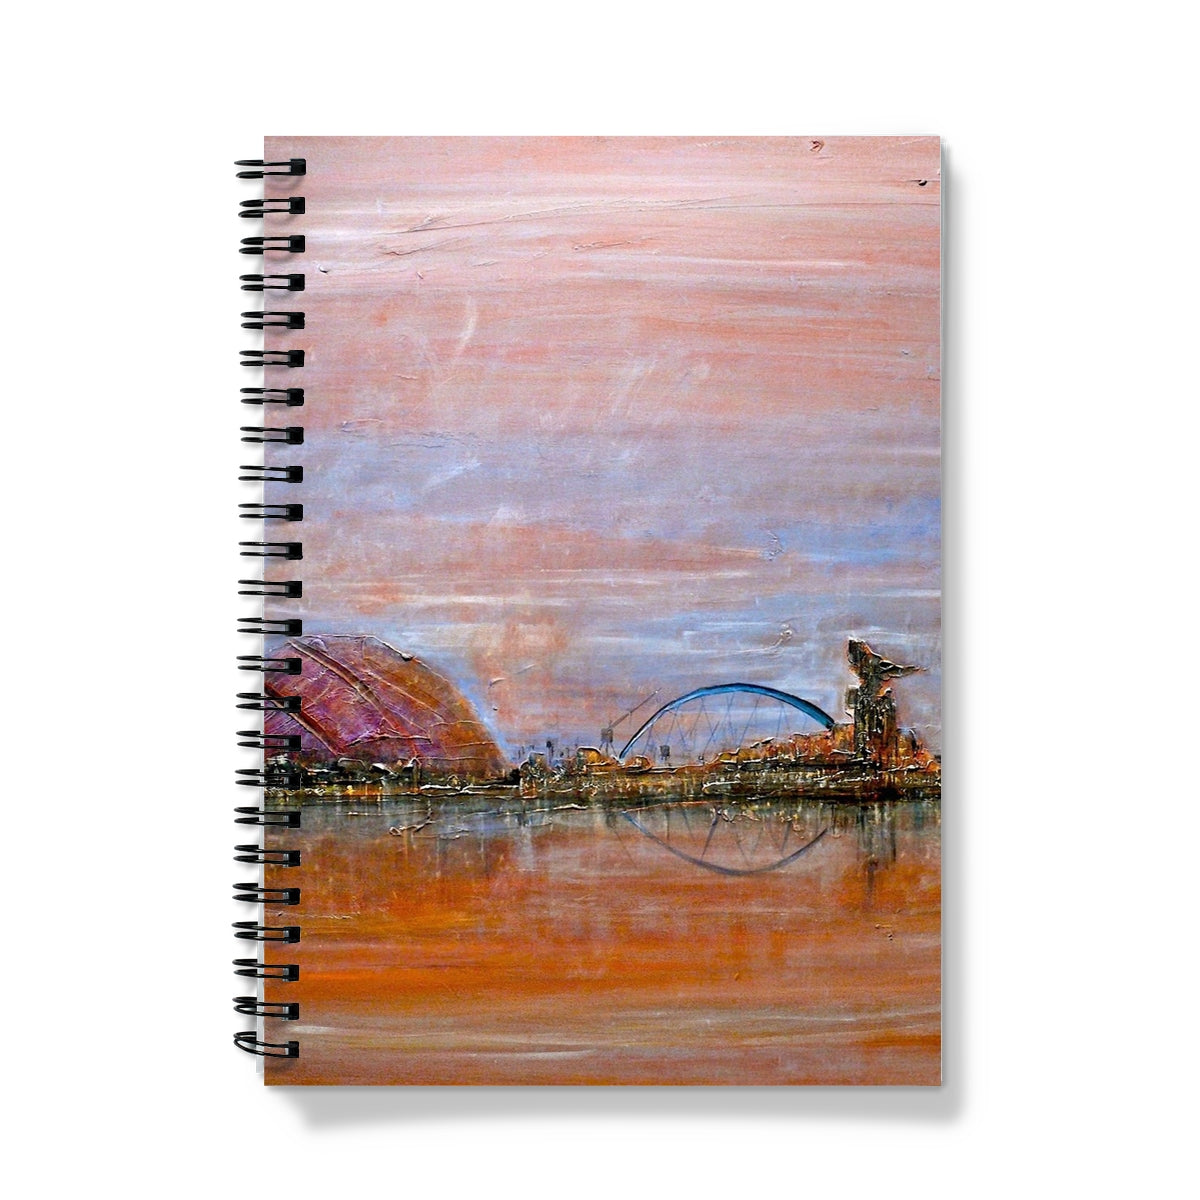 Glasgow Harbour Art Gifts Notebook-Journals & Notebooks-Edinburgh & Glasgow Art Gallery-A4-Lined-Paintings, Prints, Homeware, Art Gifts From Scotland By Scottish Artist Kevin Hunter